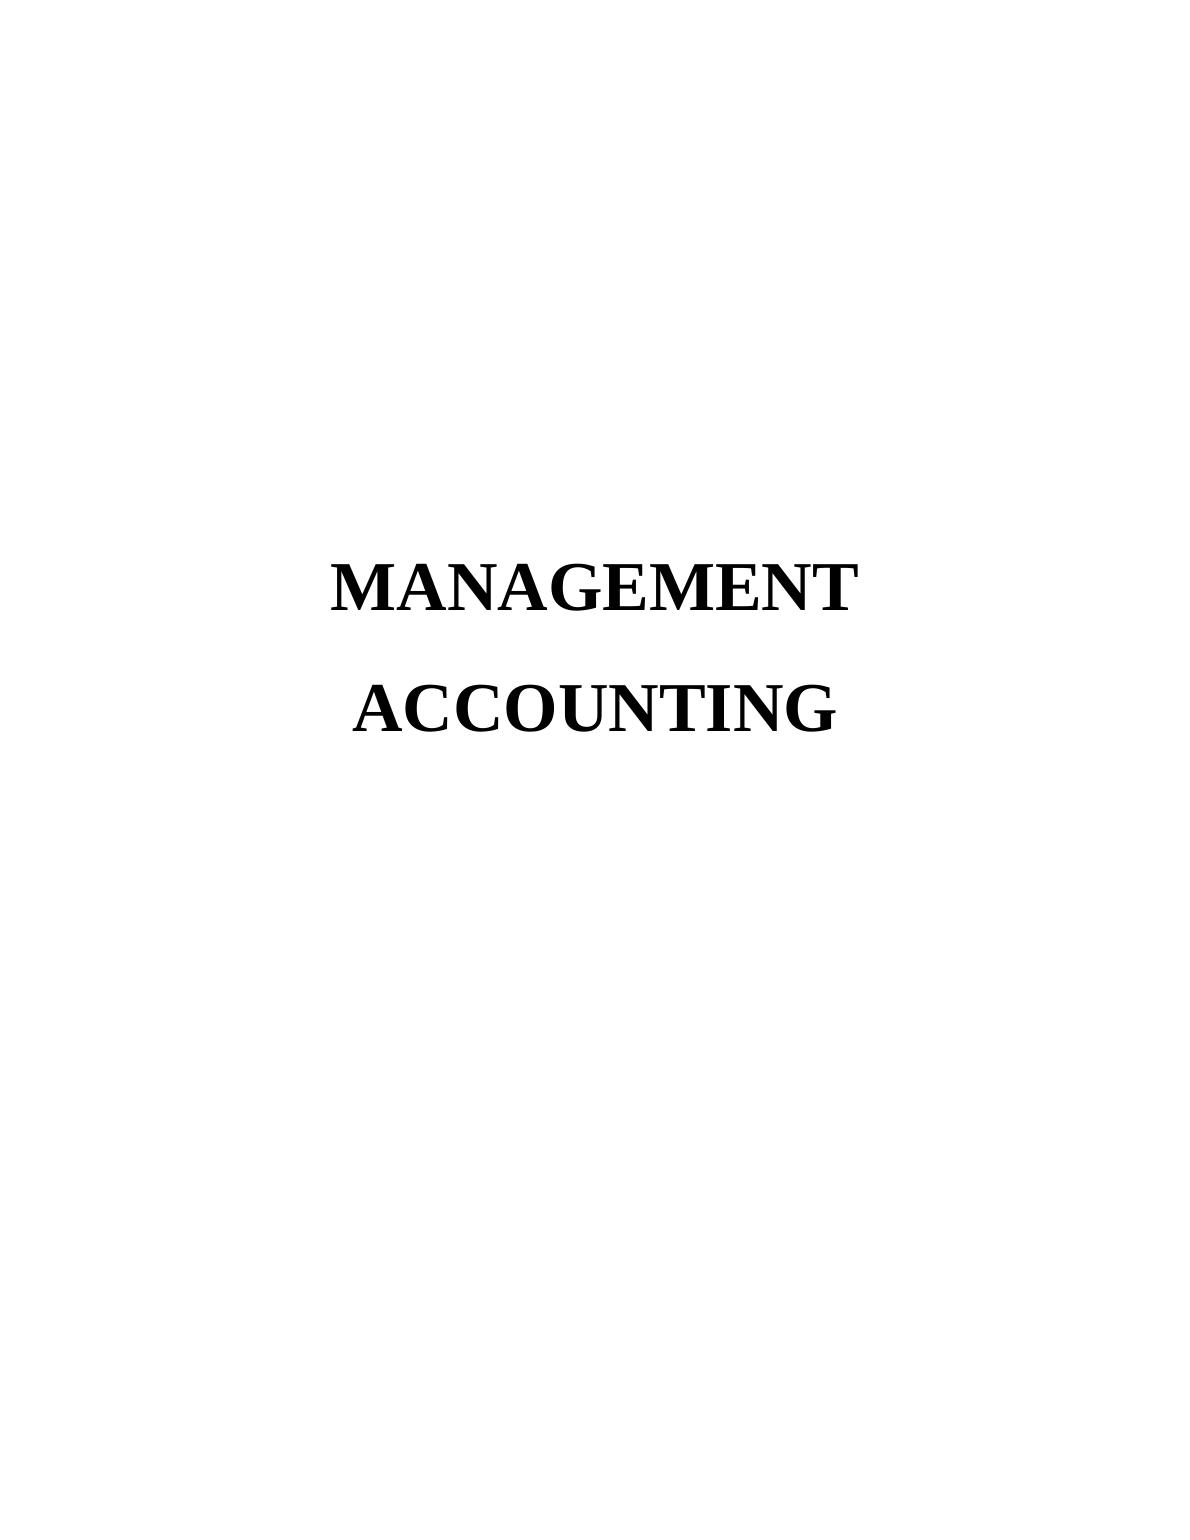 Management Accounting System_1